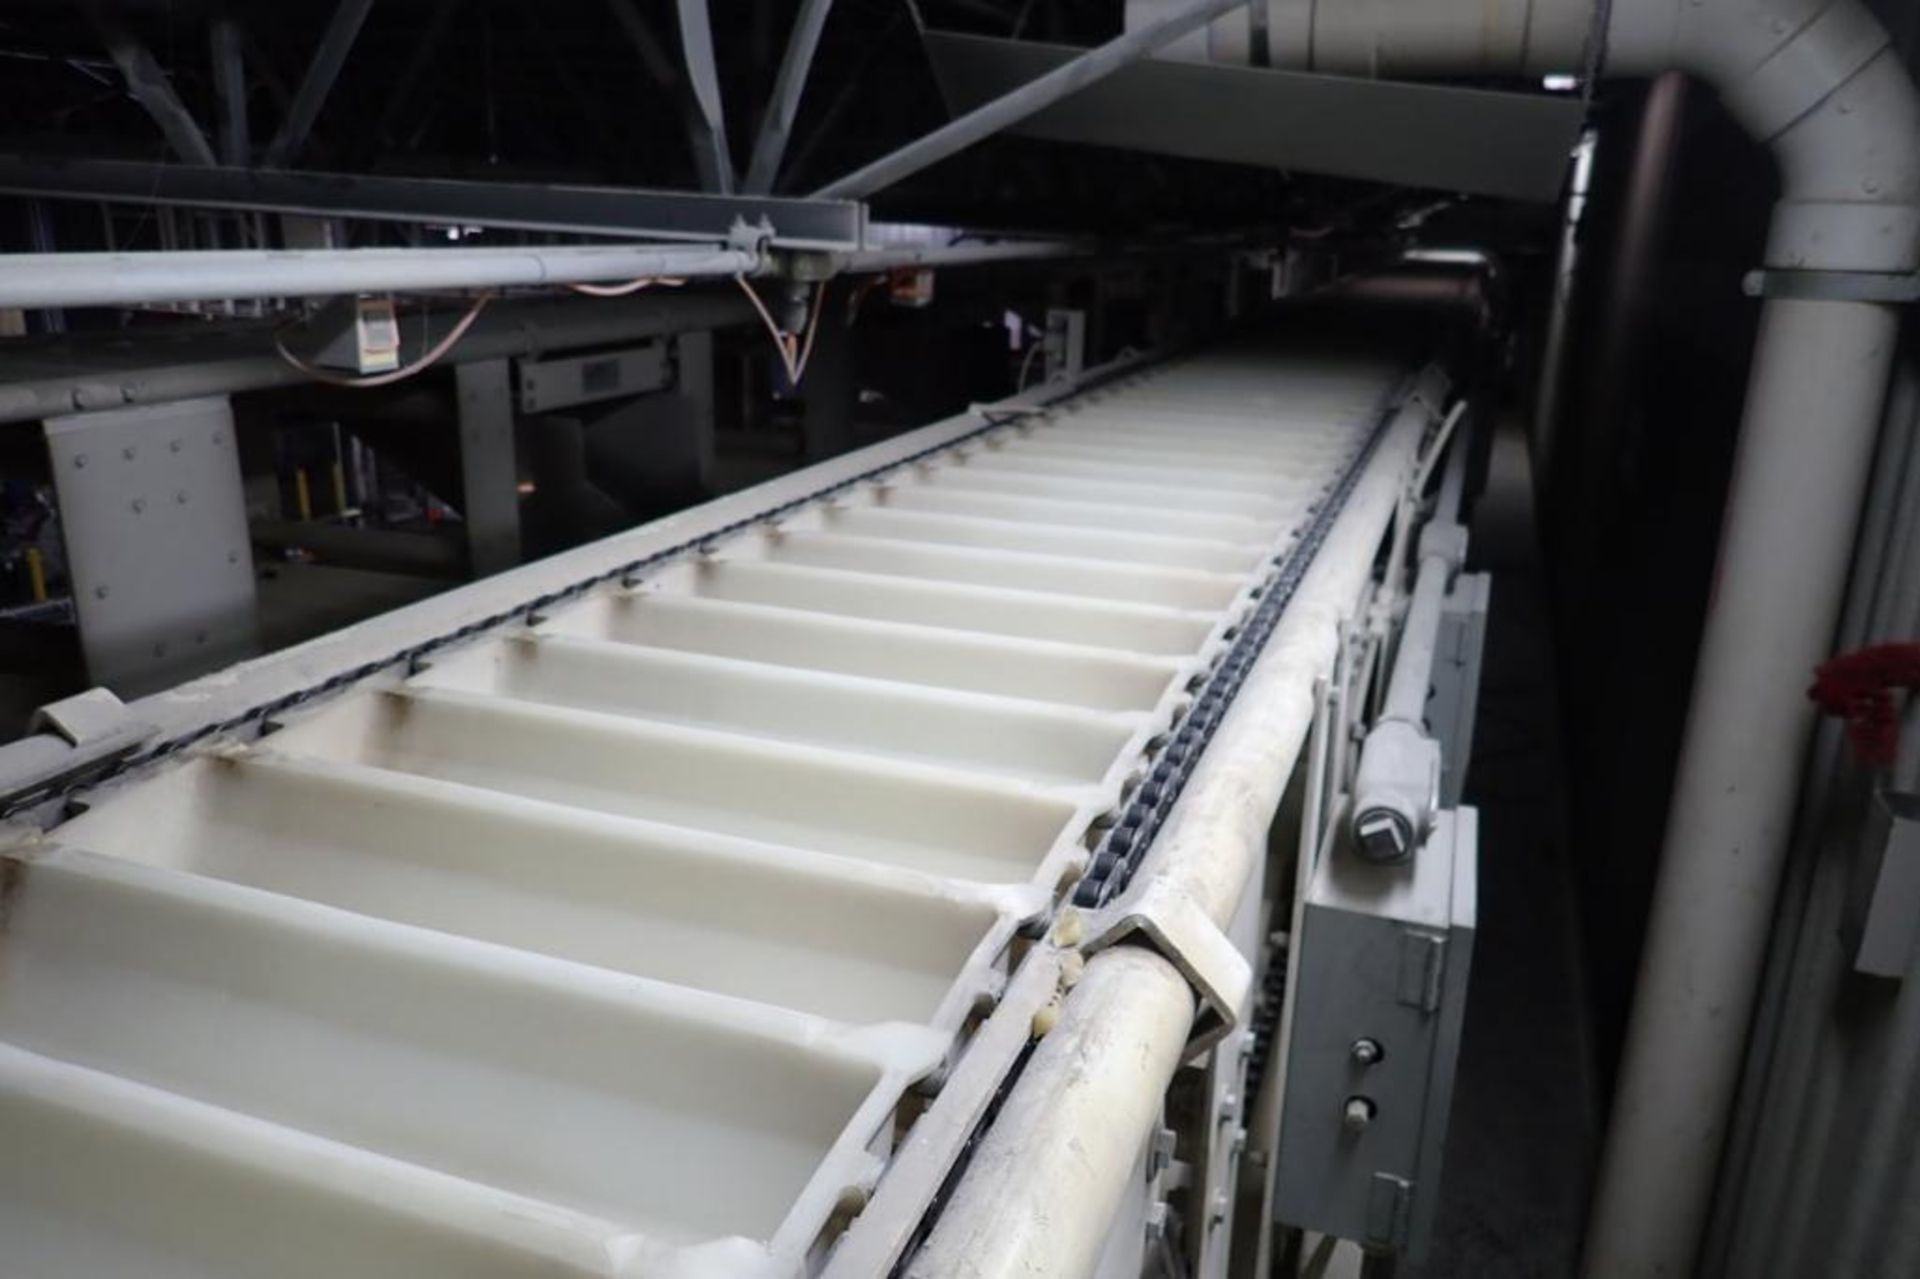 Deamco overlapping bucket conveyor, Model BES-18P-T-IDS, 63 ft. long, plastic buckets, 18 in. wide x - Image 5 of 7